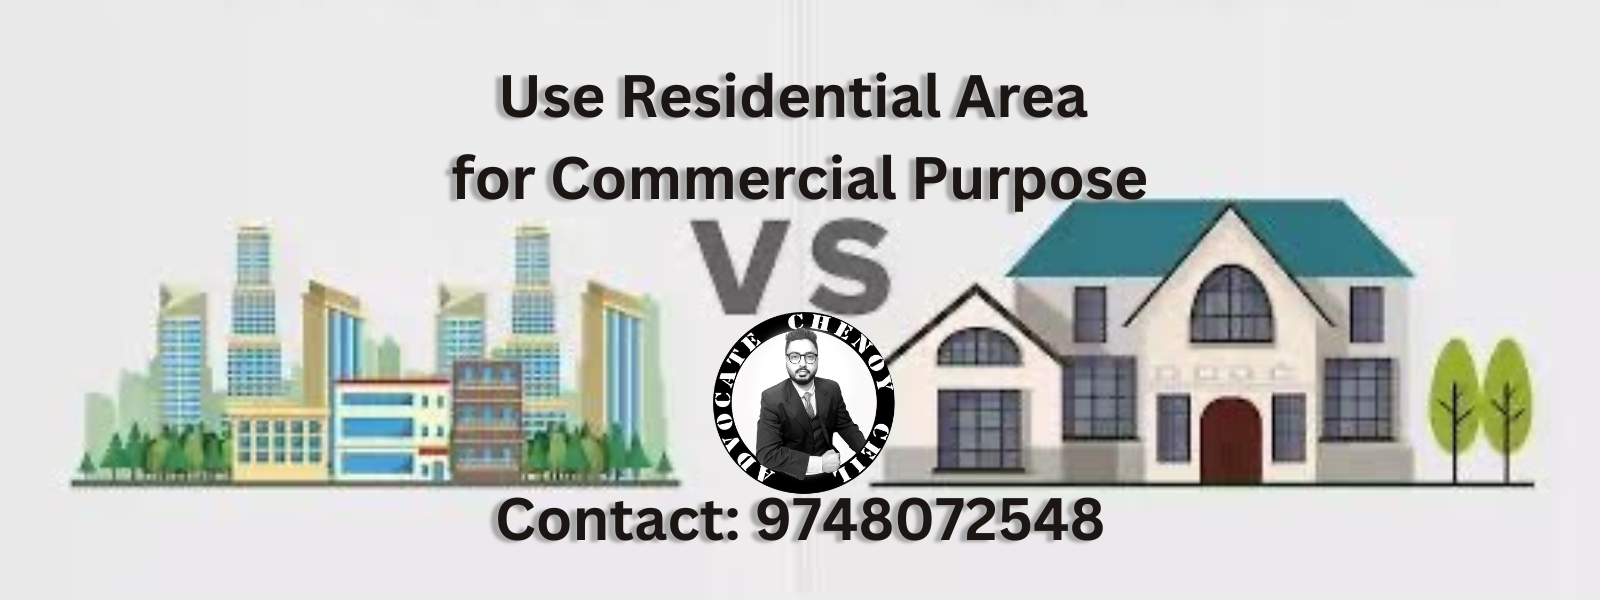 Residential Property Use for Commercial Purpose